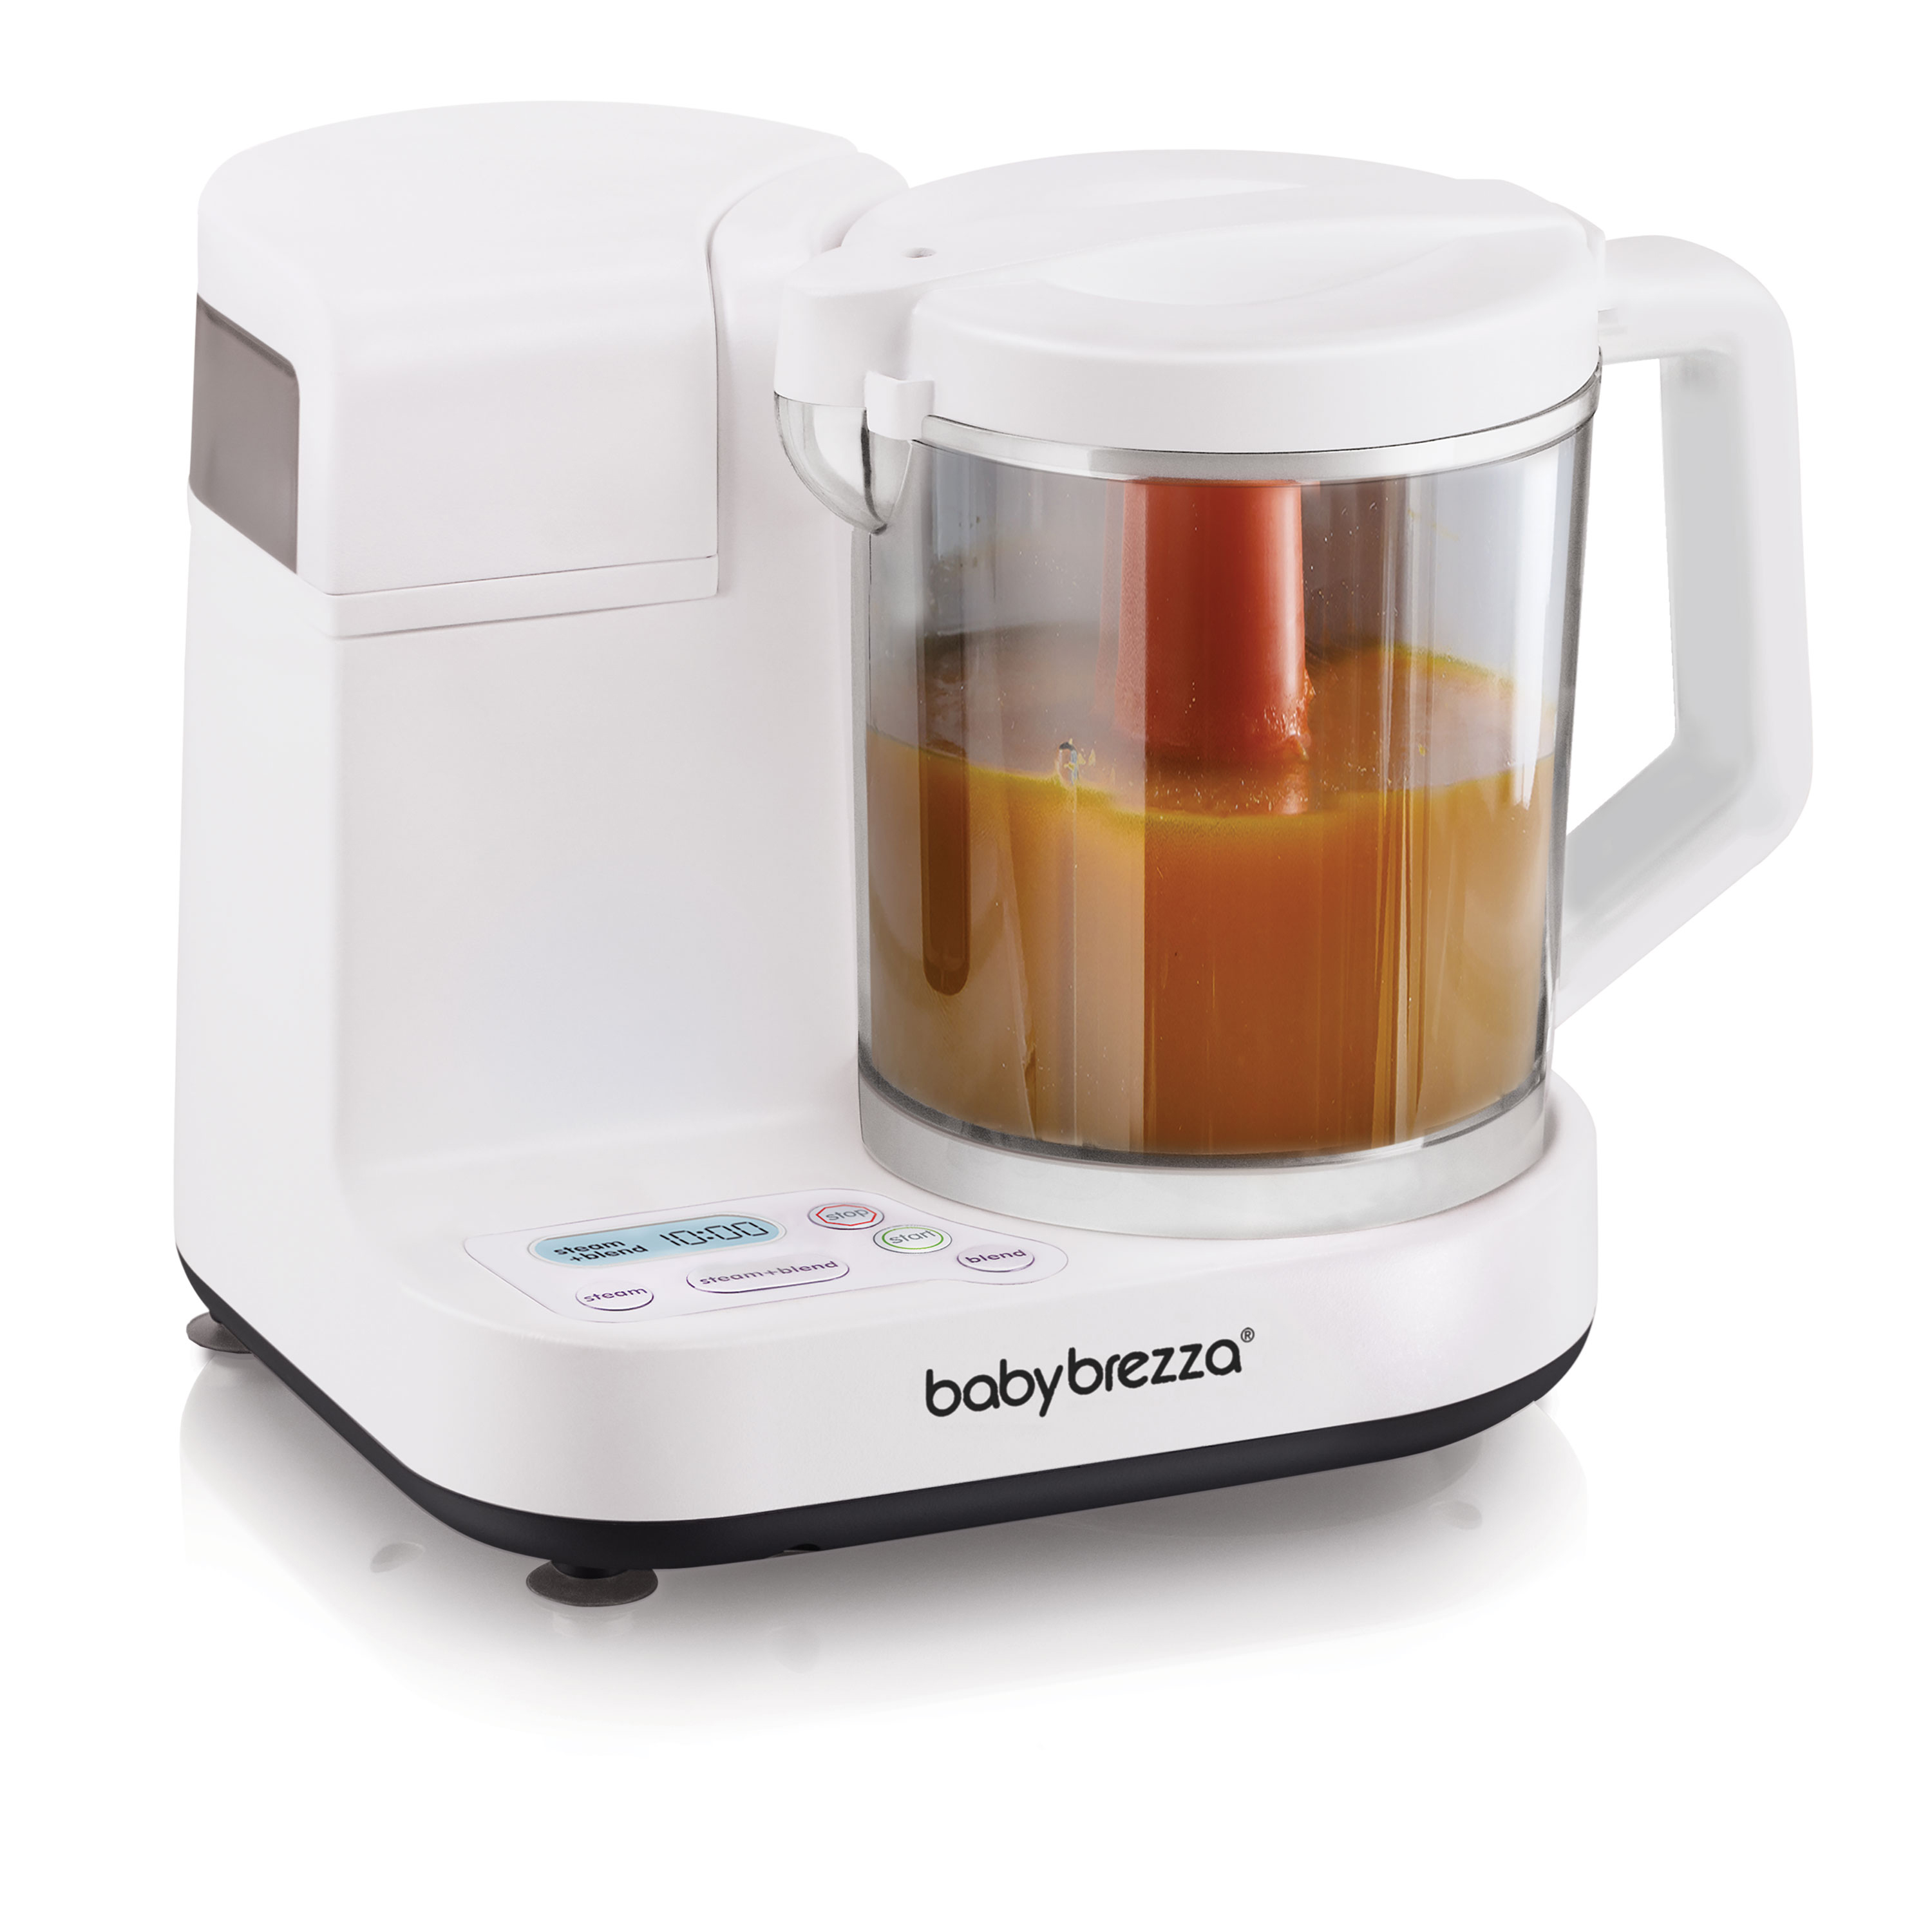 Baby Brezza Glass Baby Food Maker Cooker and Blender to Steams in Glass Bowl - 4 Cup Capacity Glass Food Maker - image 1 of 6